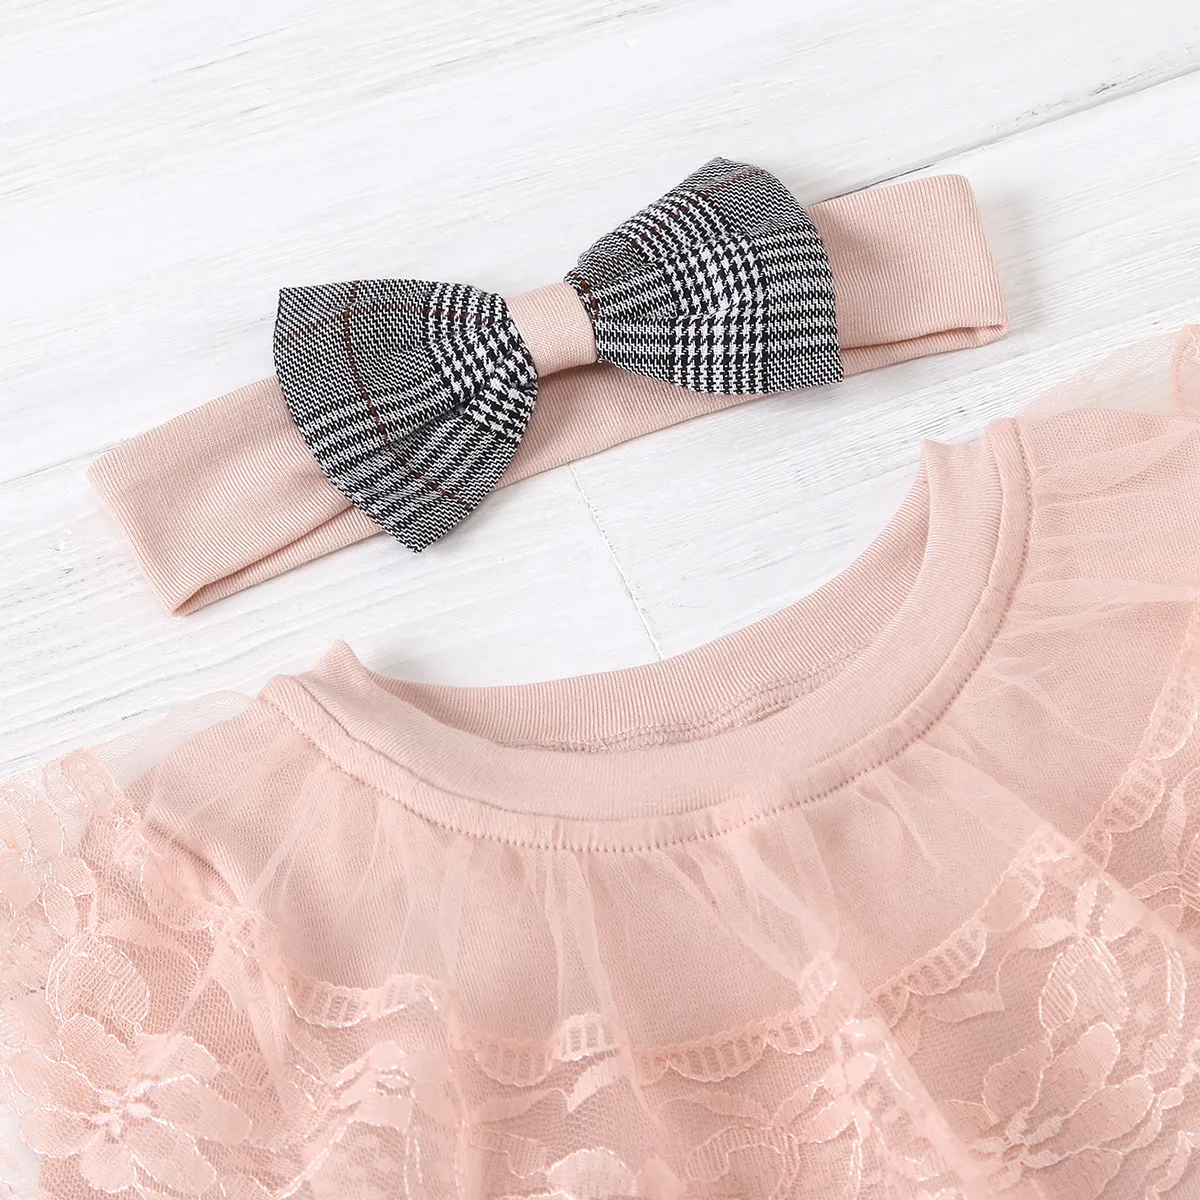 3-piece Baby / Toddler Lace Top and Bow Plaid Strap Skirt Set Pink big image 1